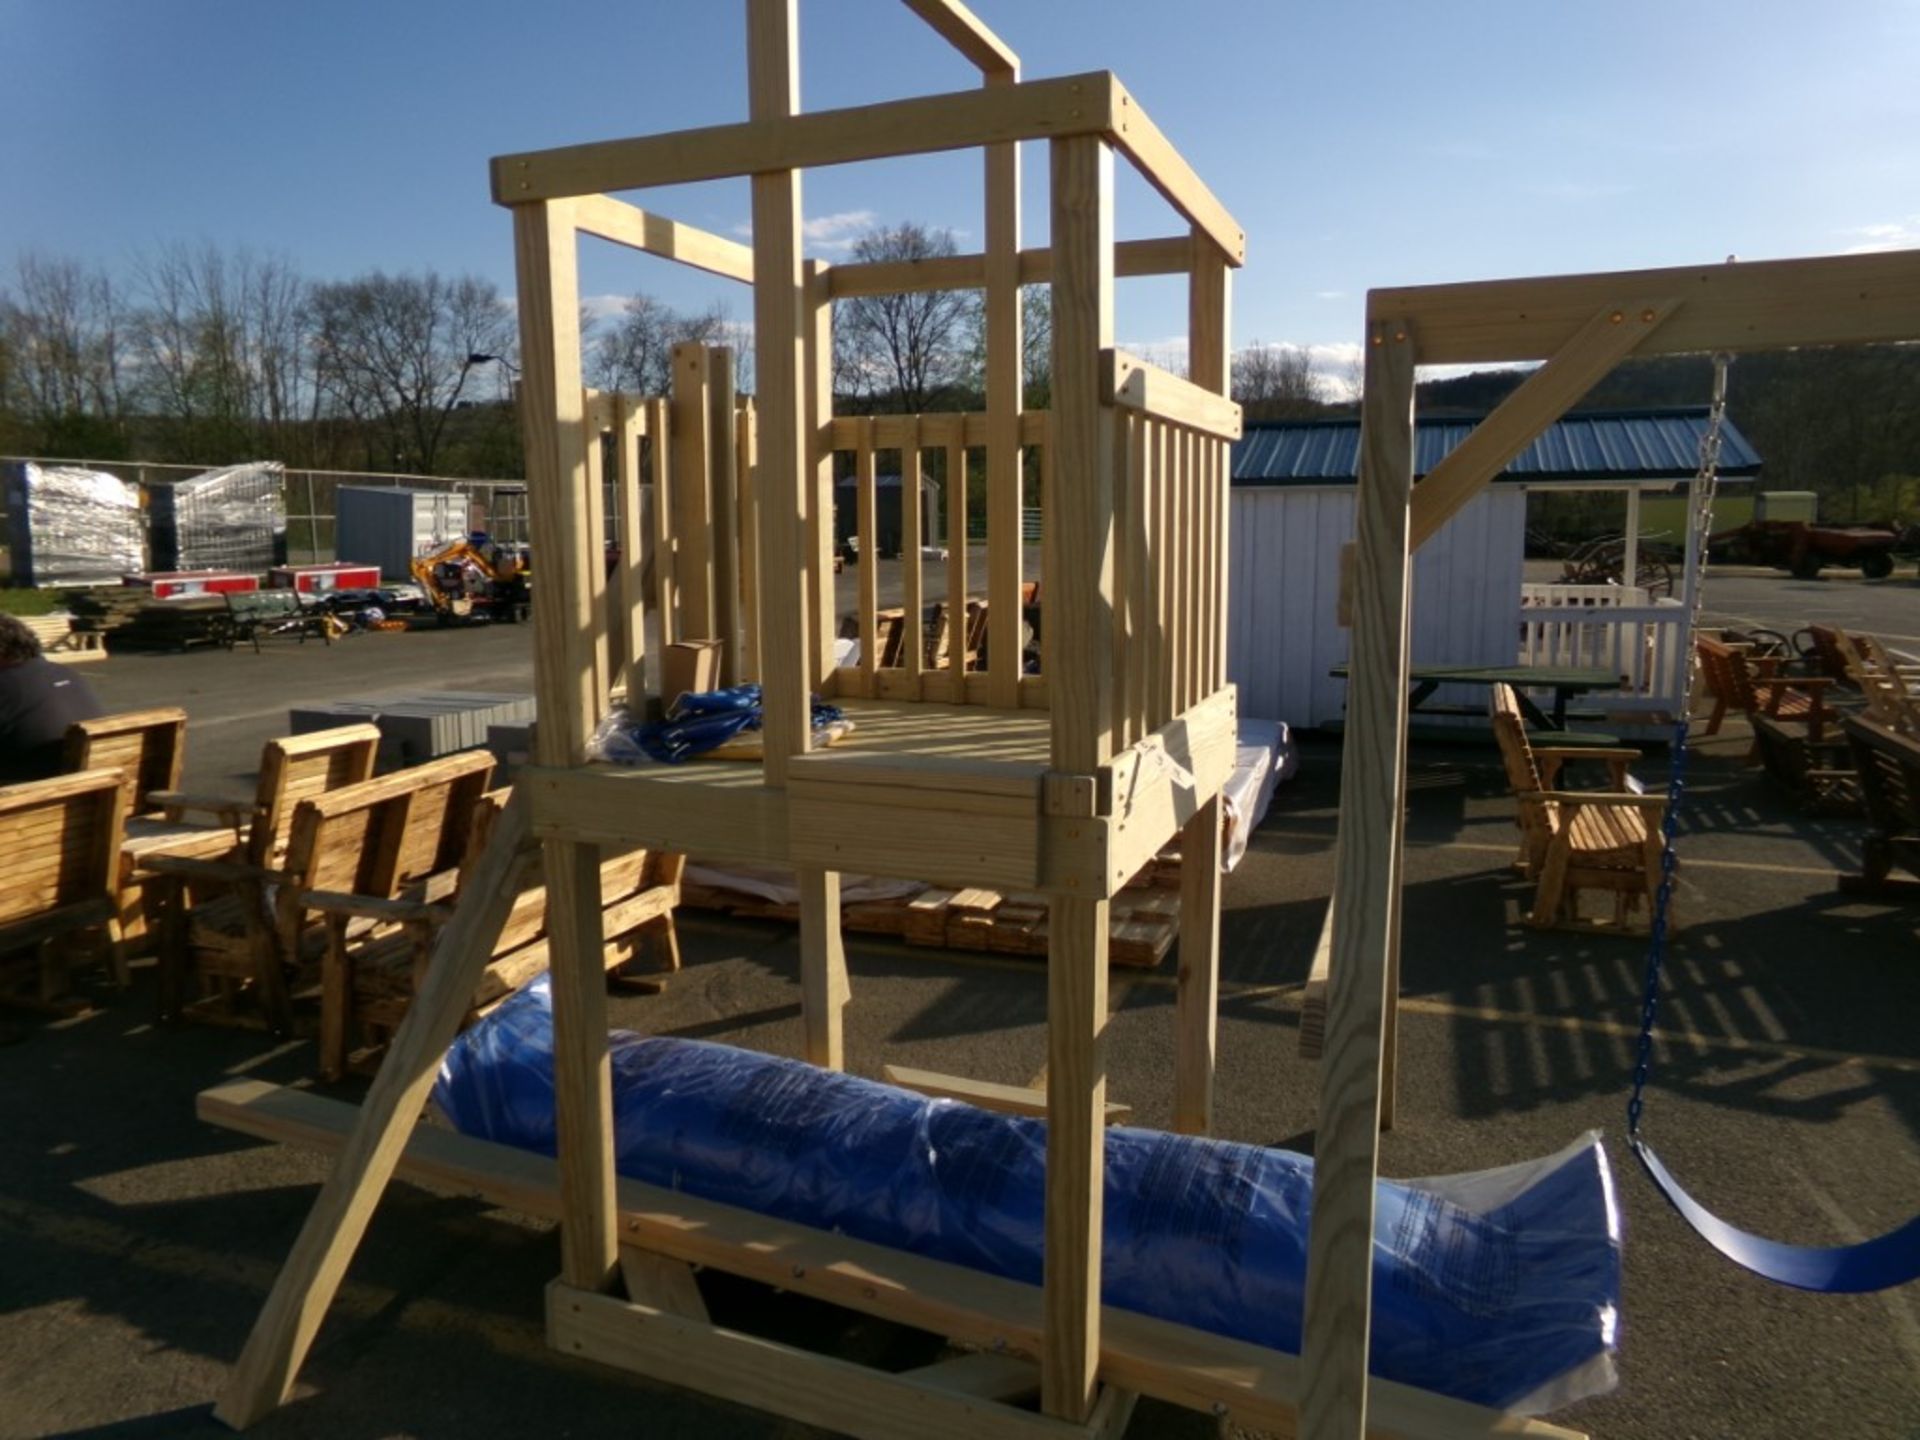 Unfinished Amish Made Swing Set, (2) Swings, Trapeze, Slide and Canopy, Dissembled (4490)